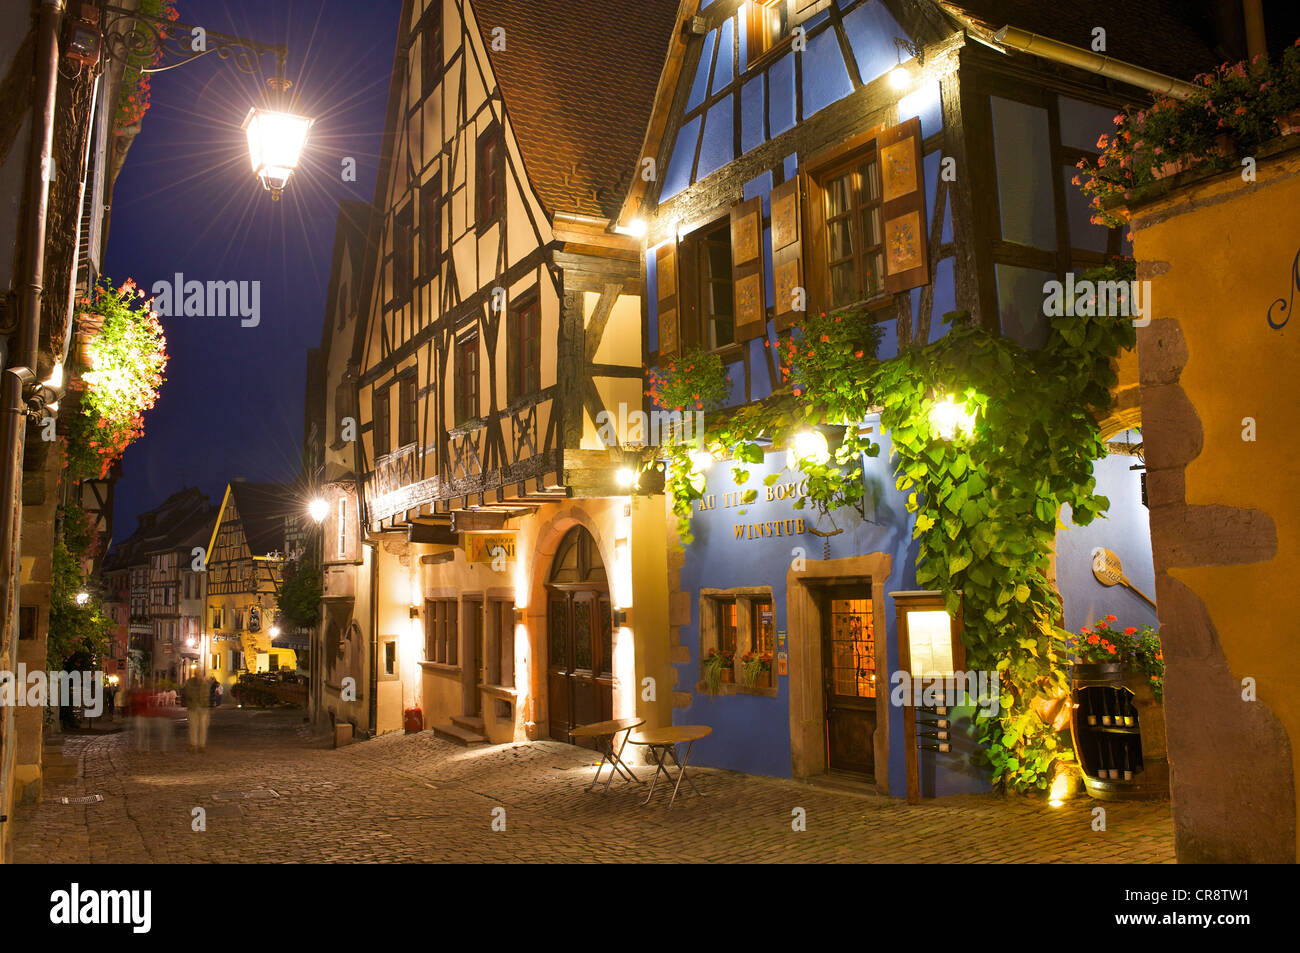 Winery and half-timbered houses at night, Riquewihr, Alsace, France, Europe Stock Photo